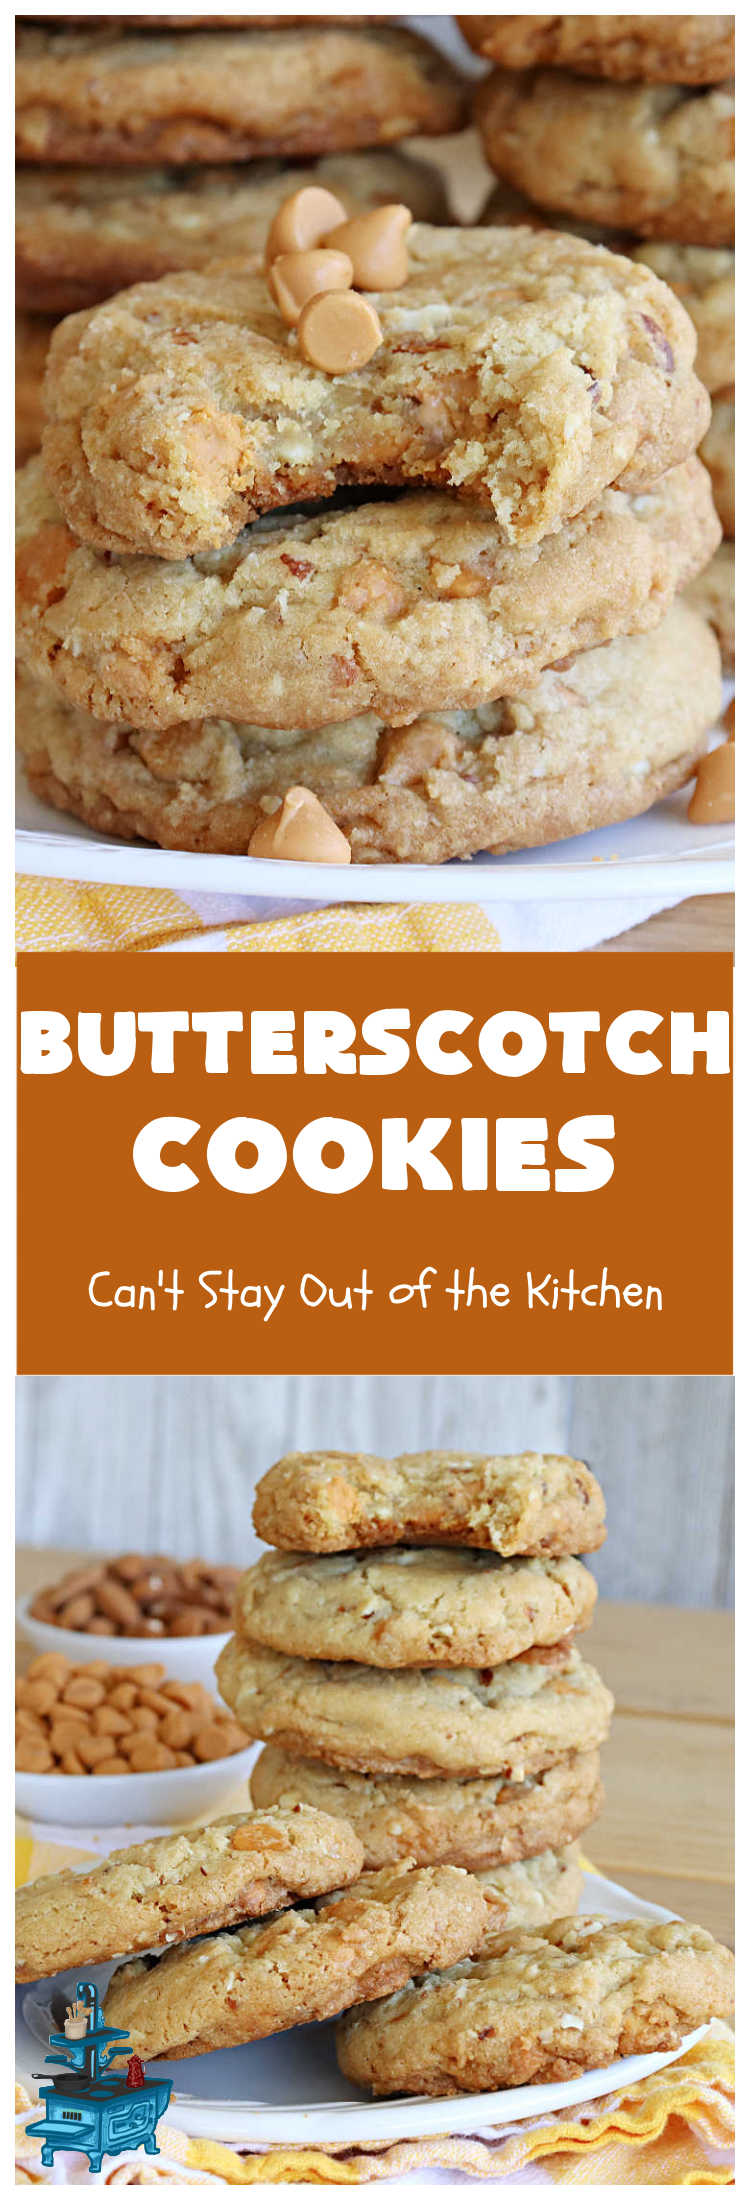 Butterscotch Cookies | Can't Stay Out of the Kitchen